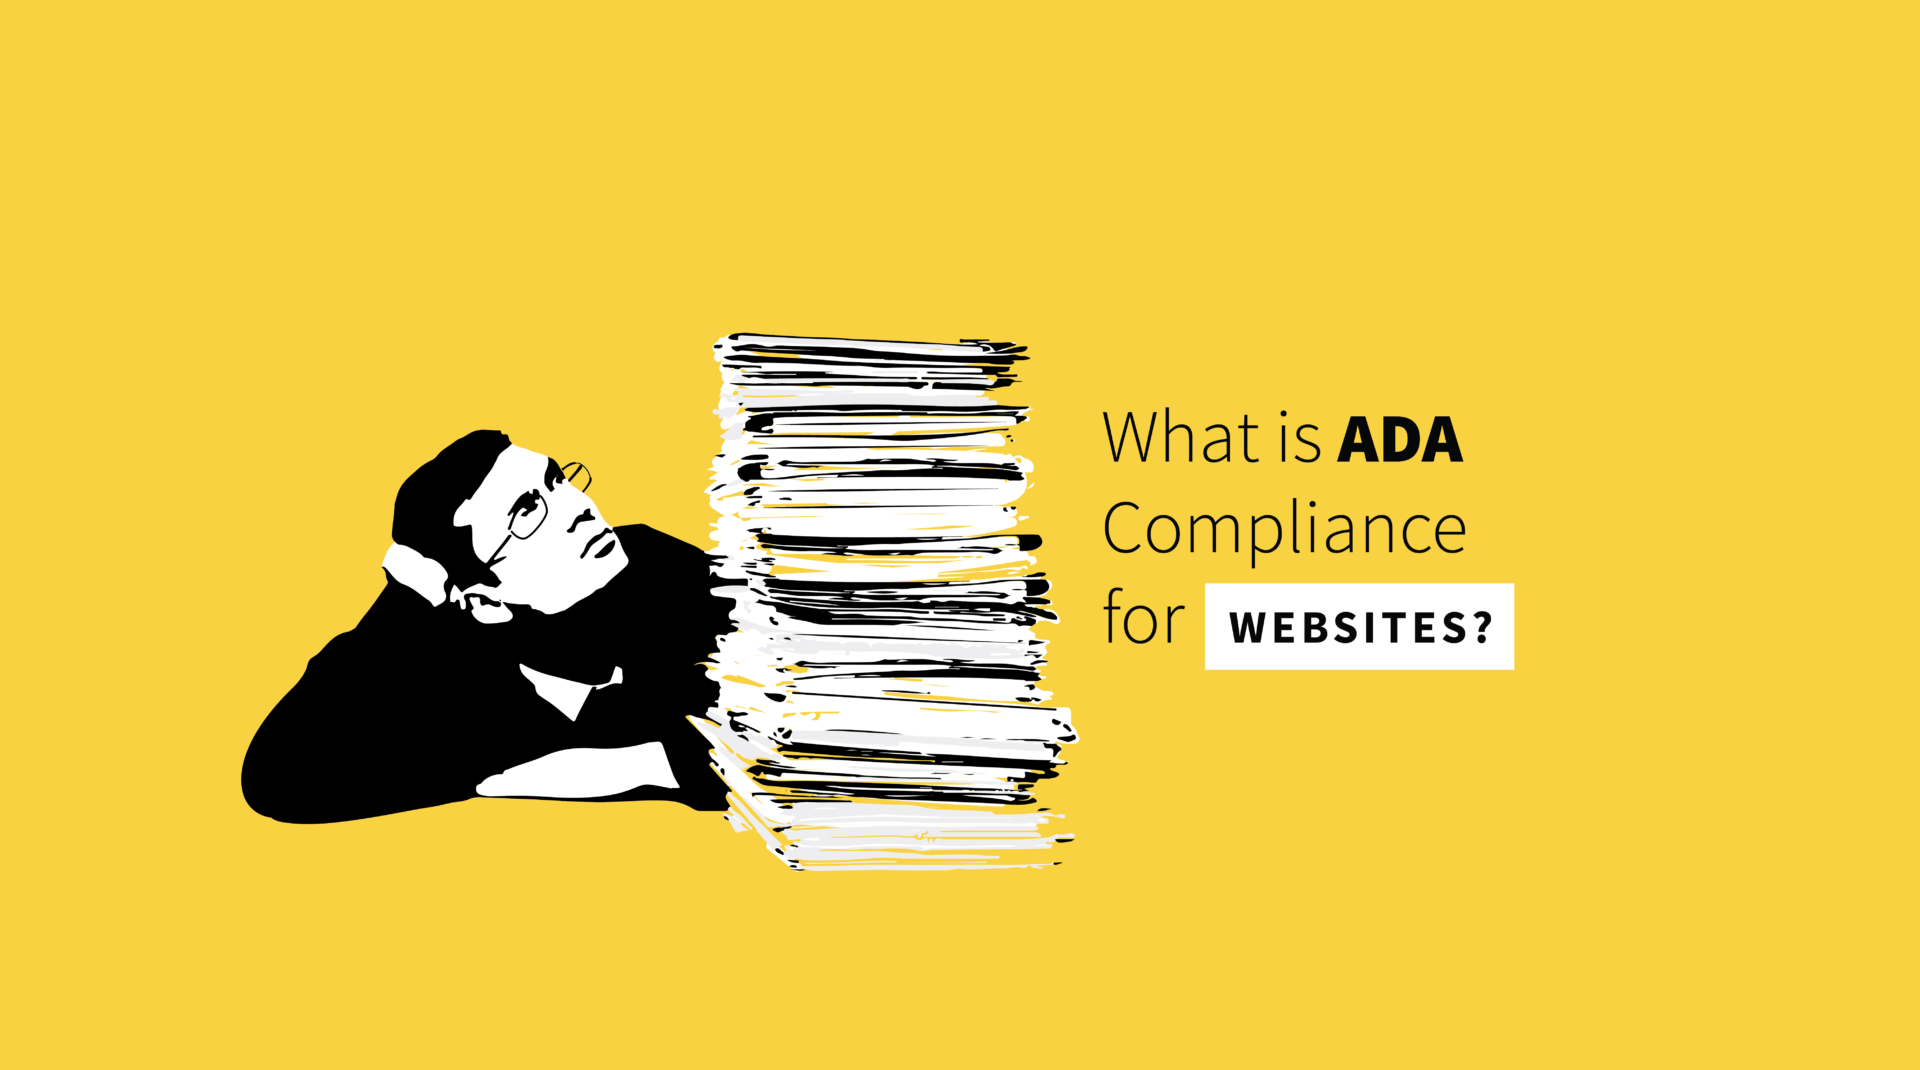 What is ADA Compliance for Websites